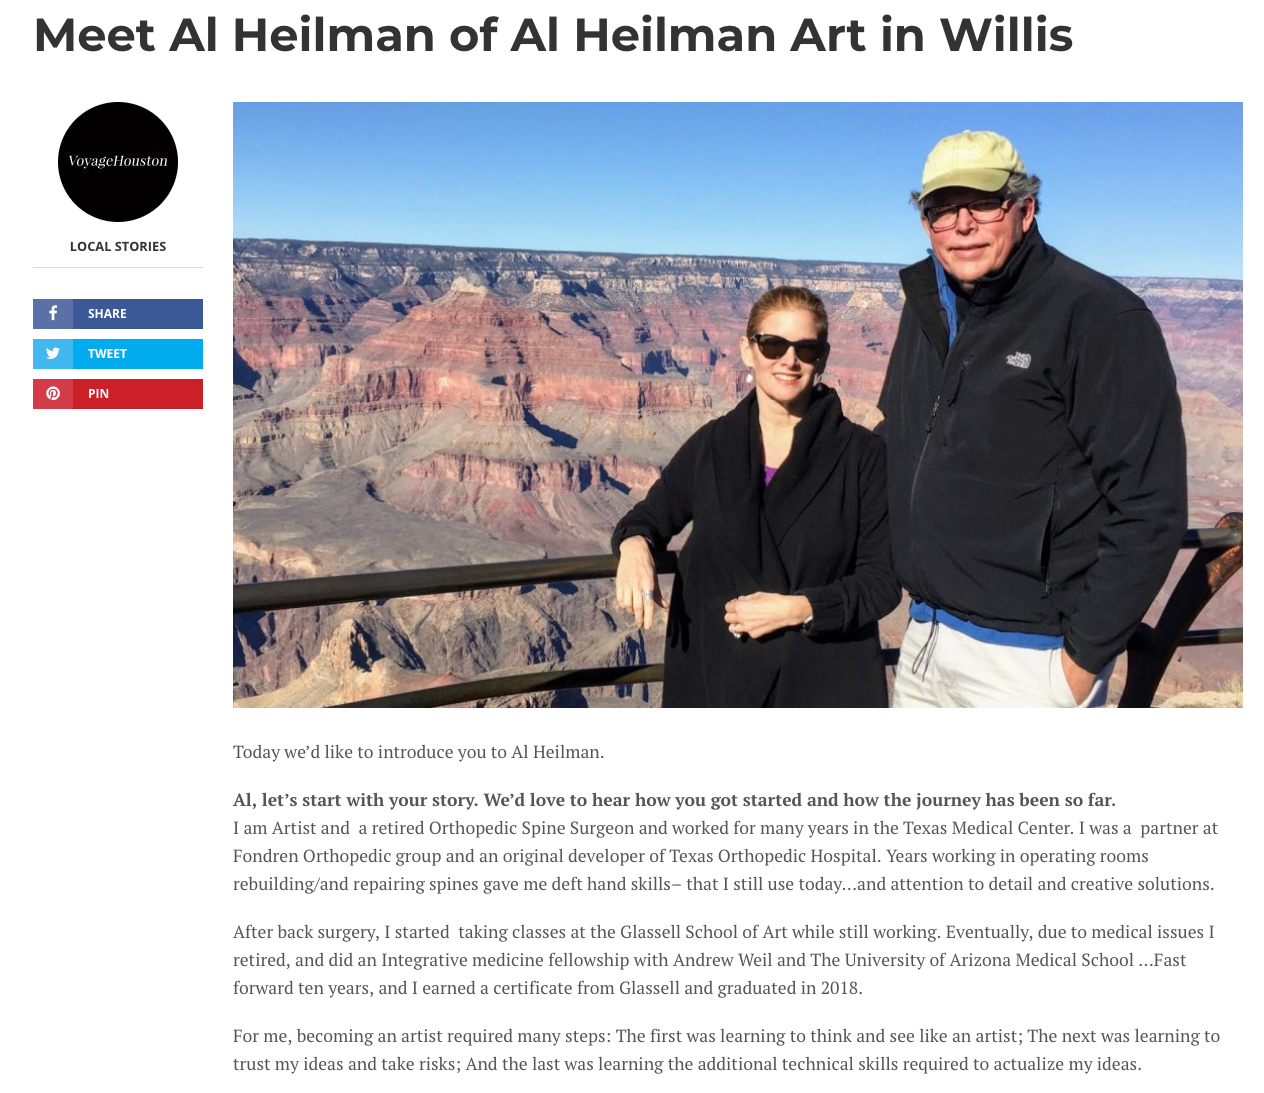 An article about Al Heilman and his Art